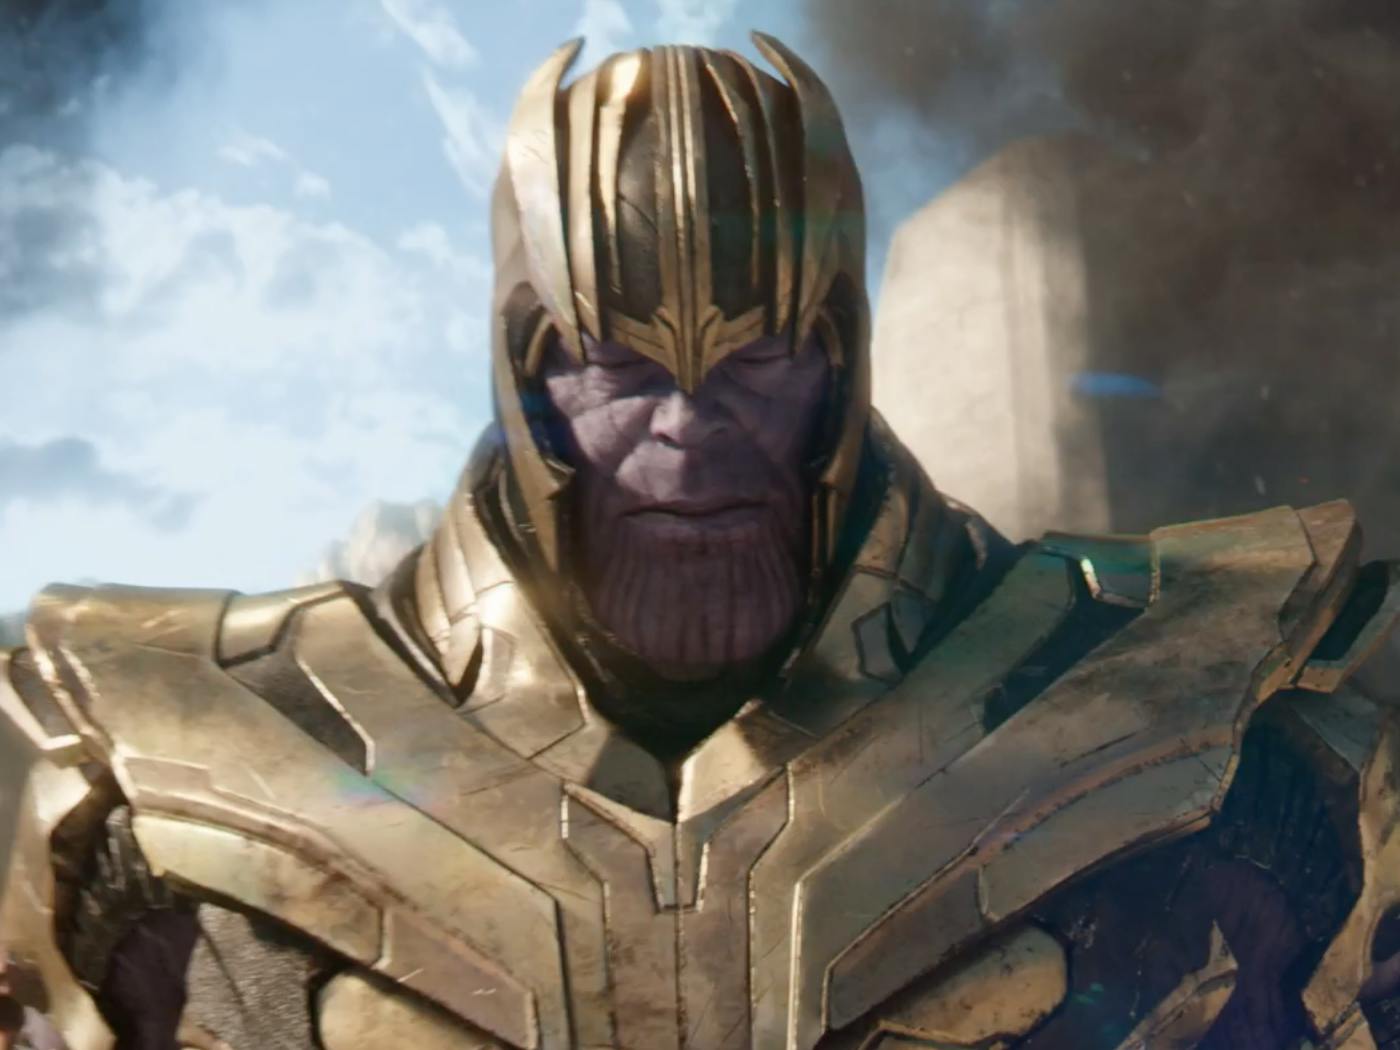 we-see-thanos-in-his-full-armor-at-some-point-presumably-in-a-flashback.png